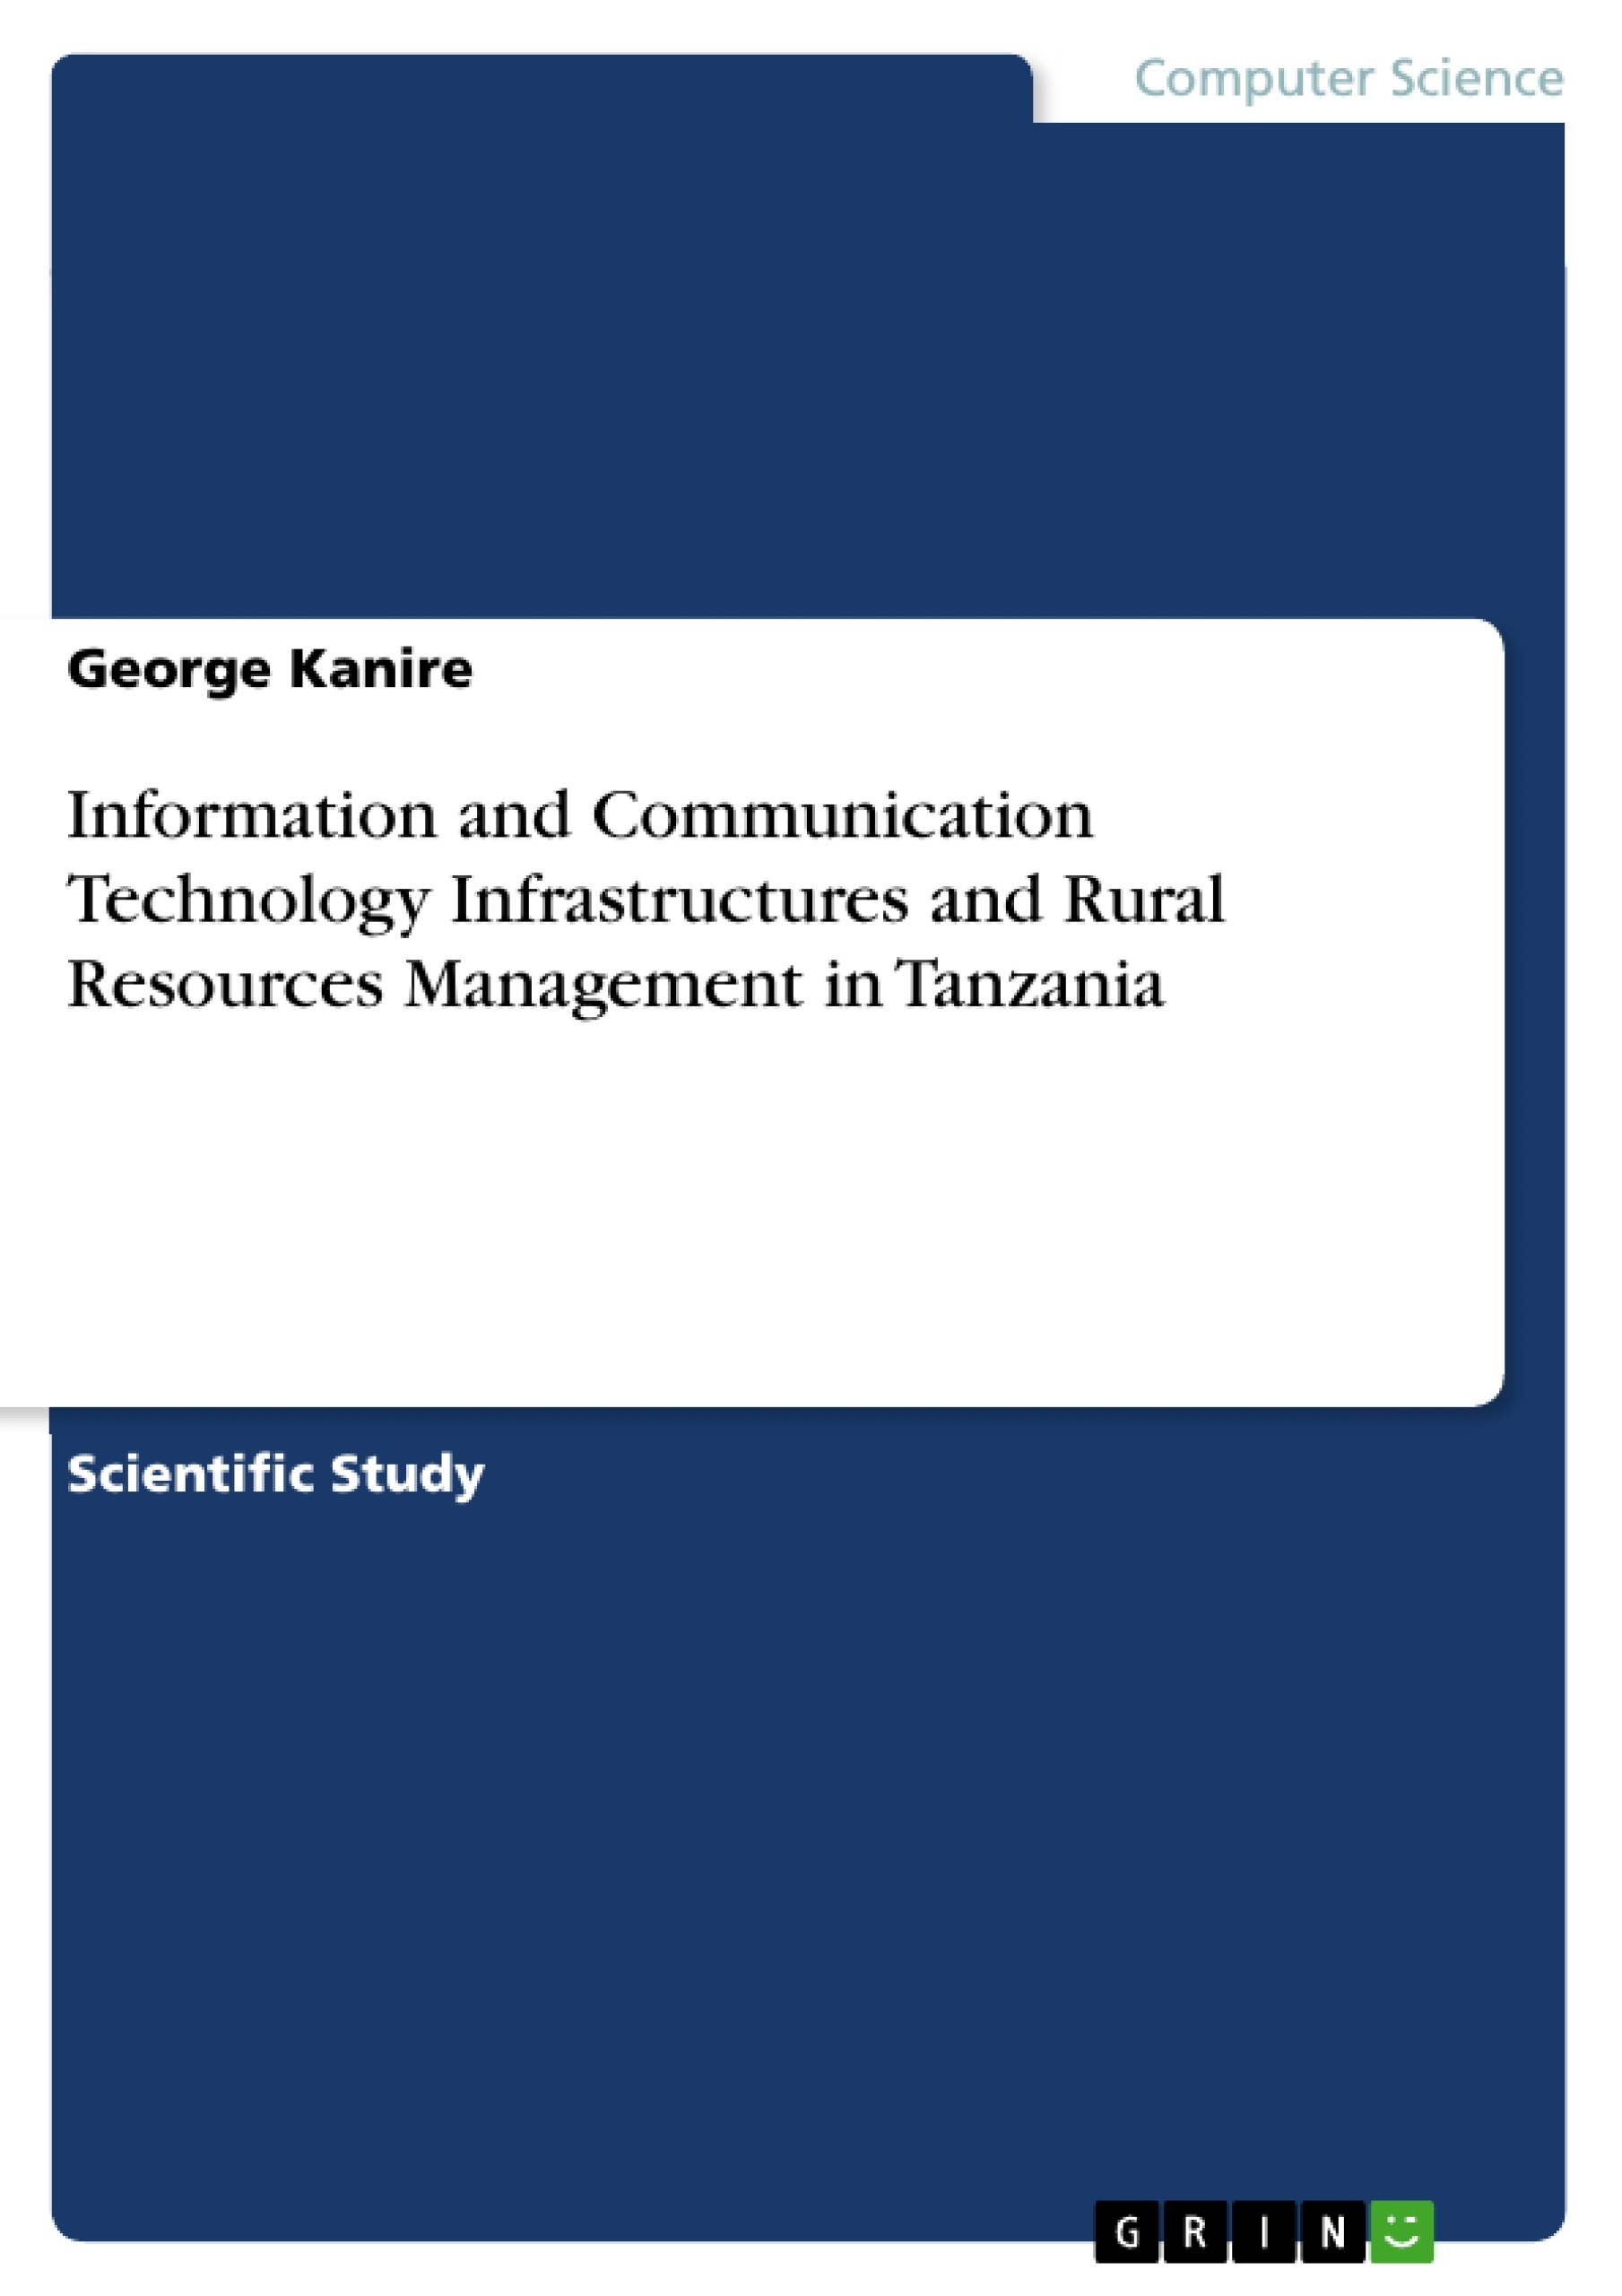 Titel: Information and Communication Technology Infrastructures and Rural Resources Management in Tanzania